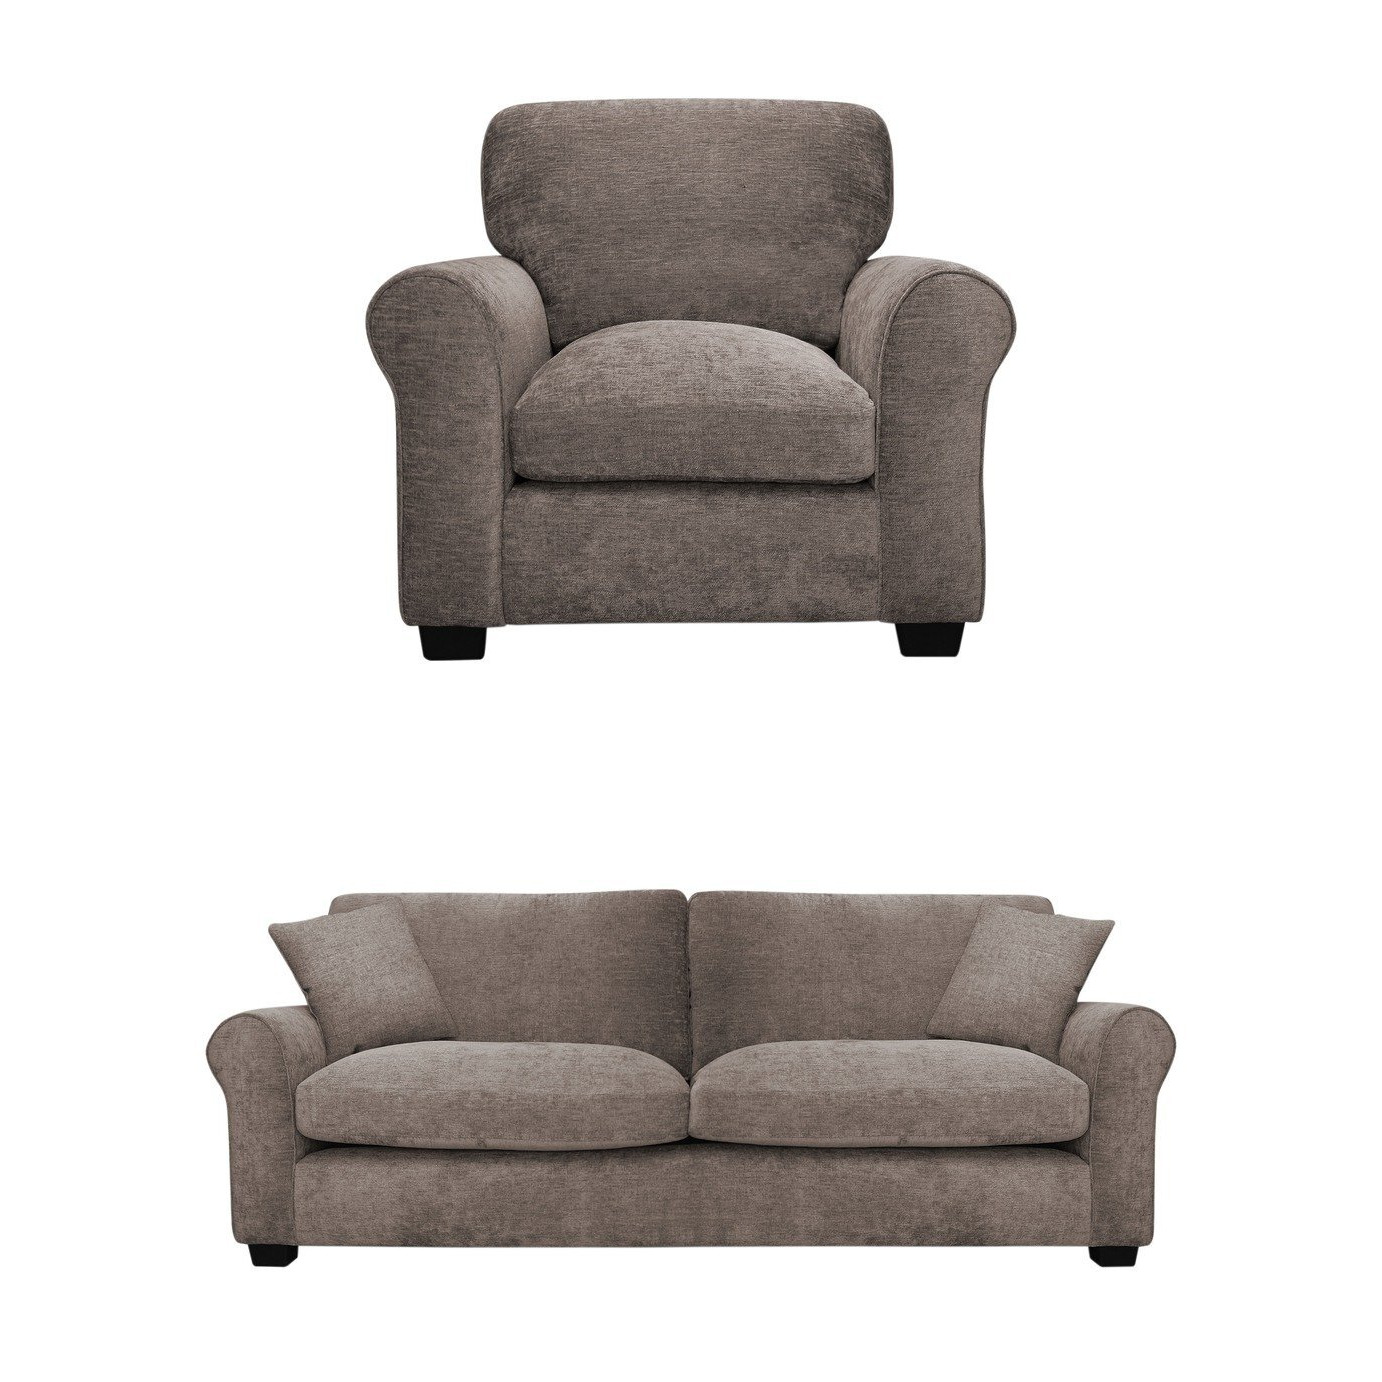 Argos Home Taylor Fabric Chair & 3 Seater Sofa - Mink - image 1